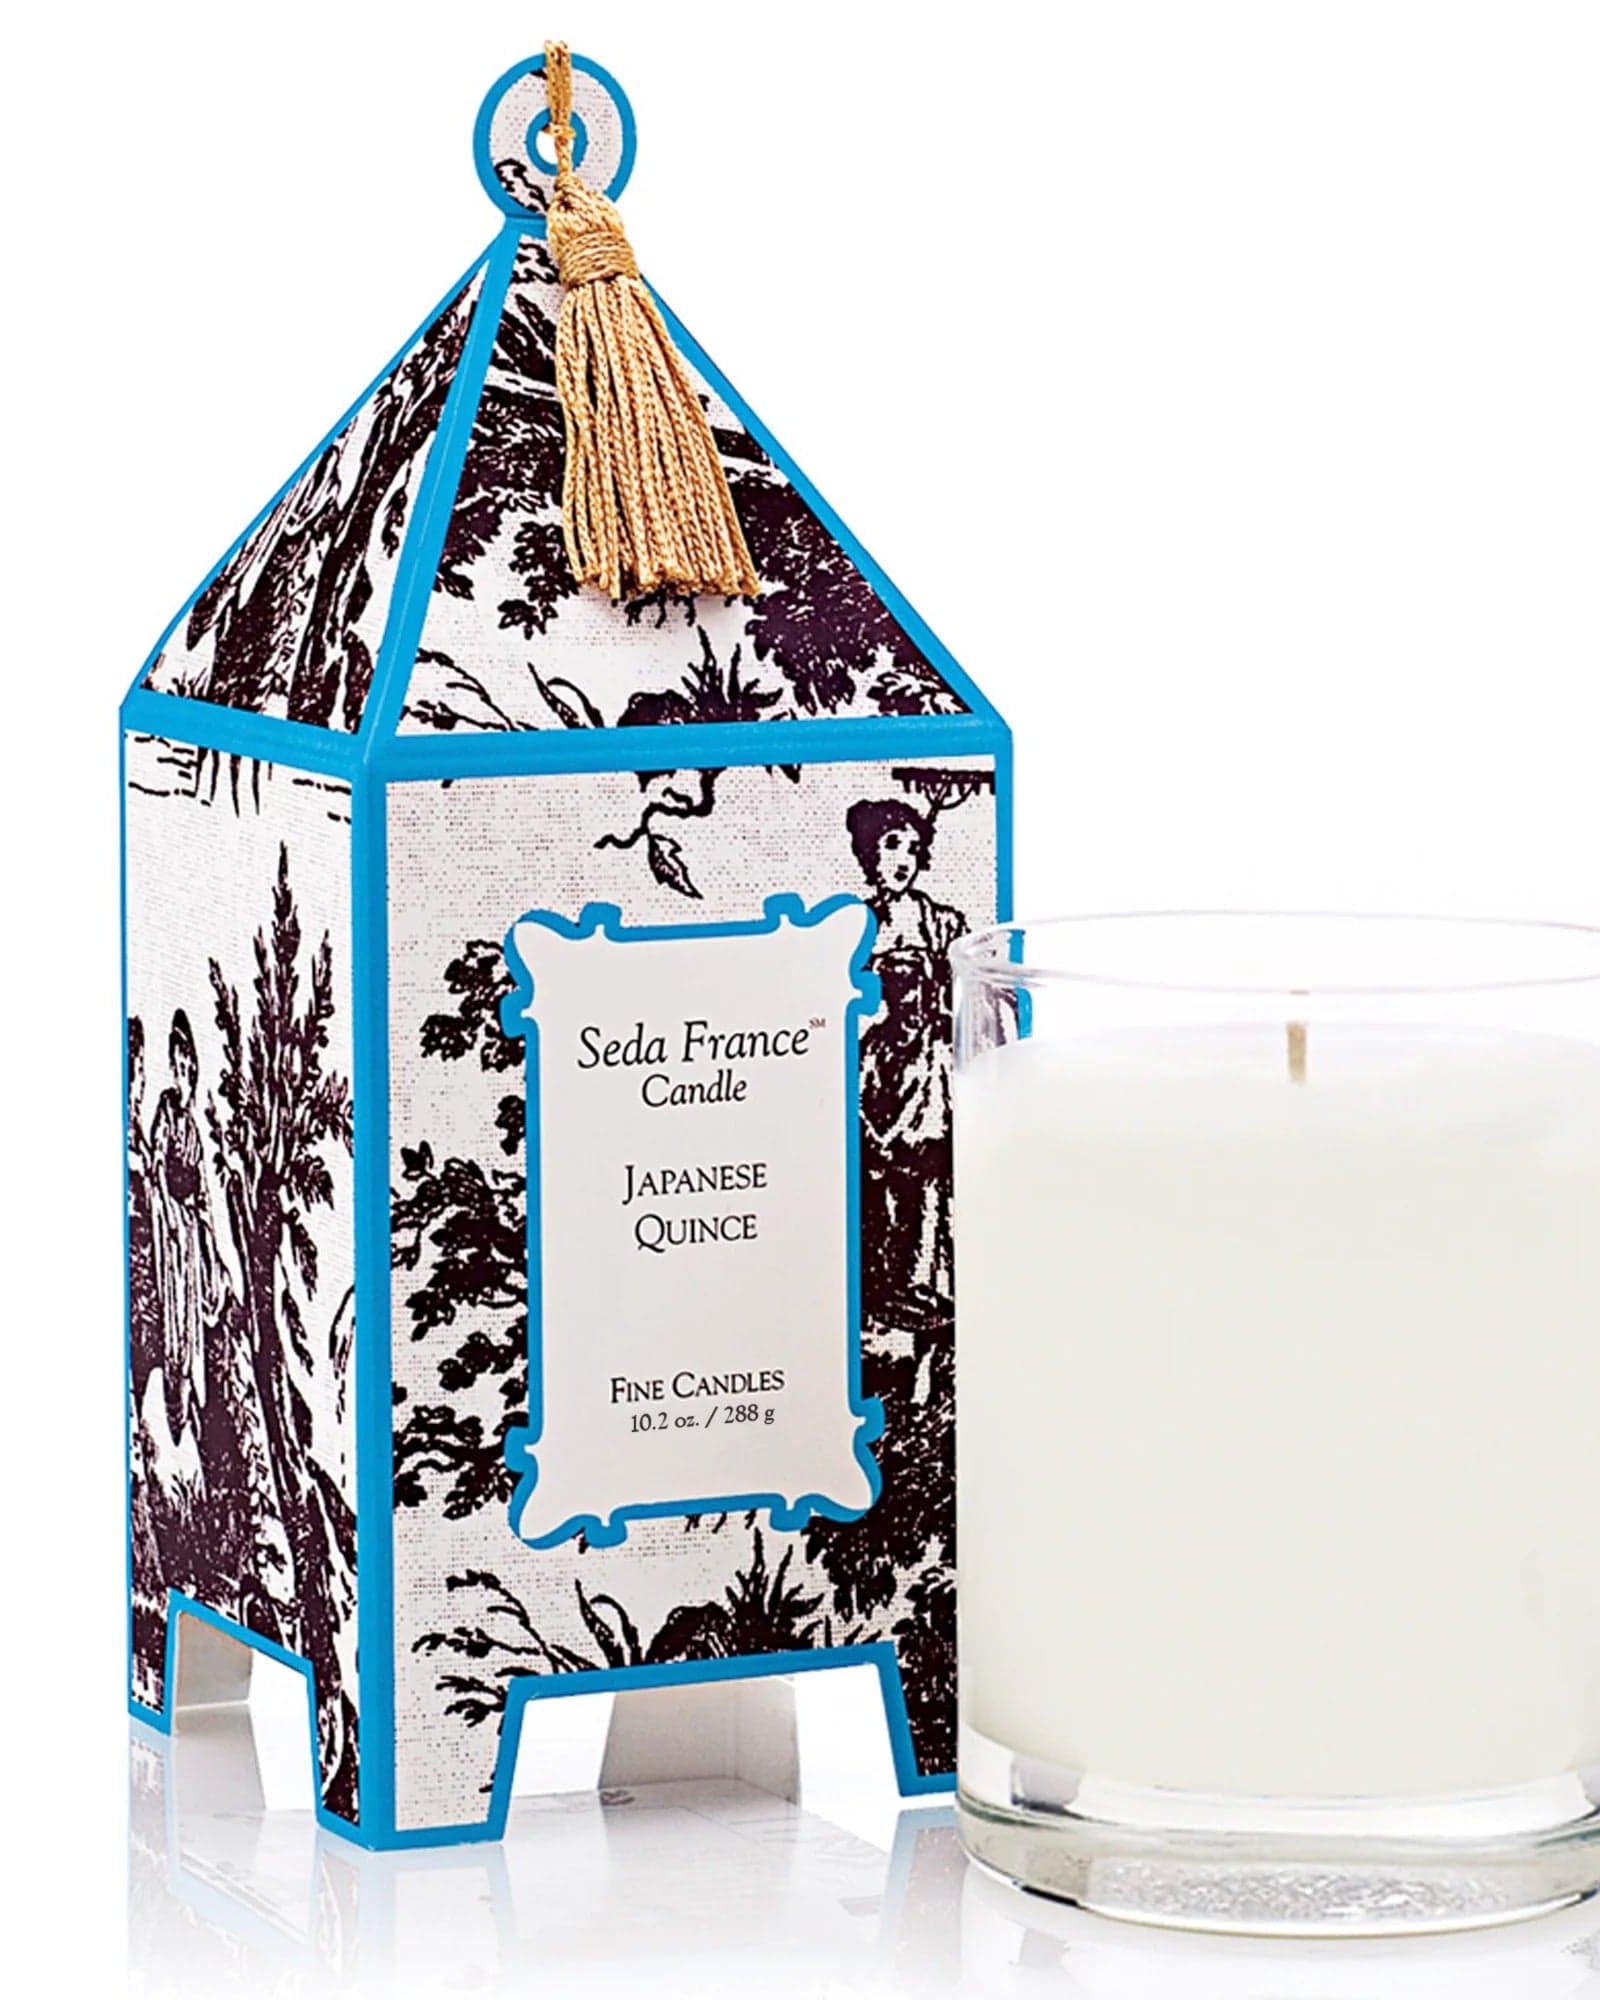 Seda France Candles Candles and Scents Japanese Quince Toile Pagoda Box Candle